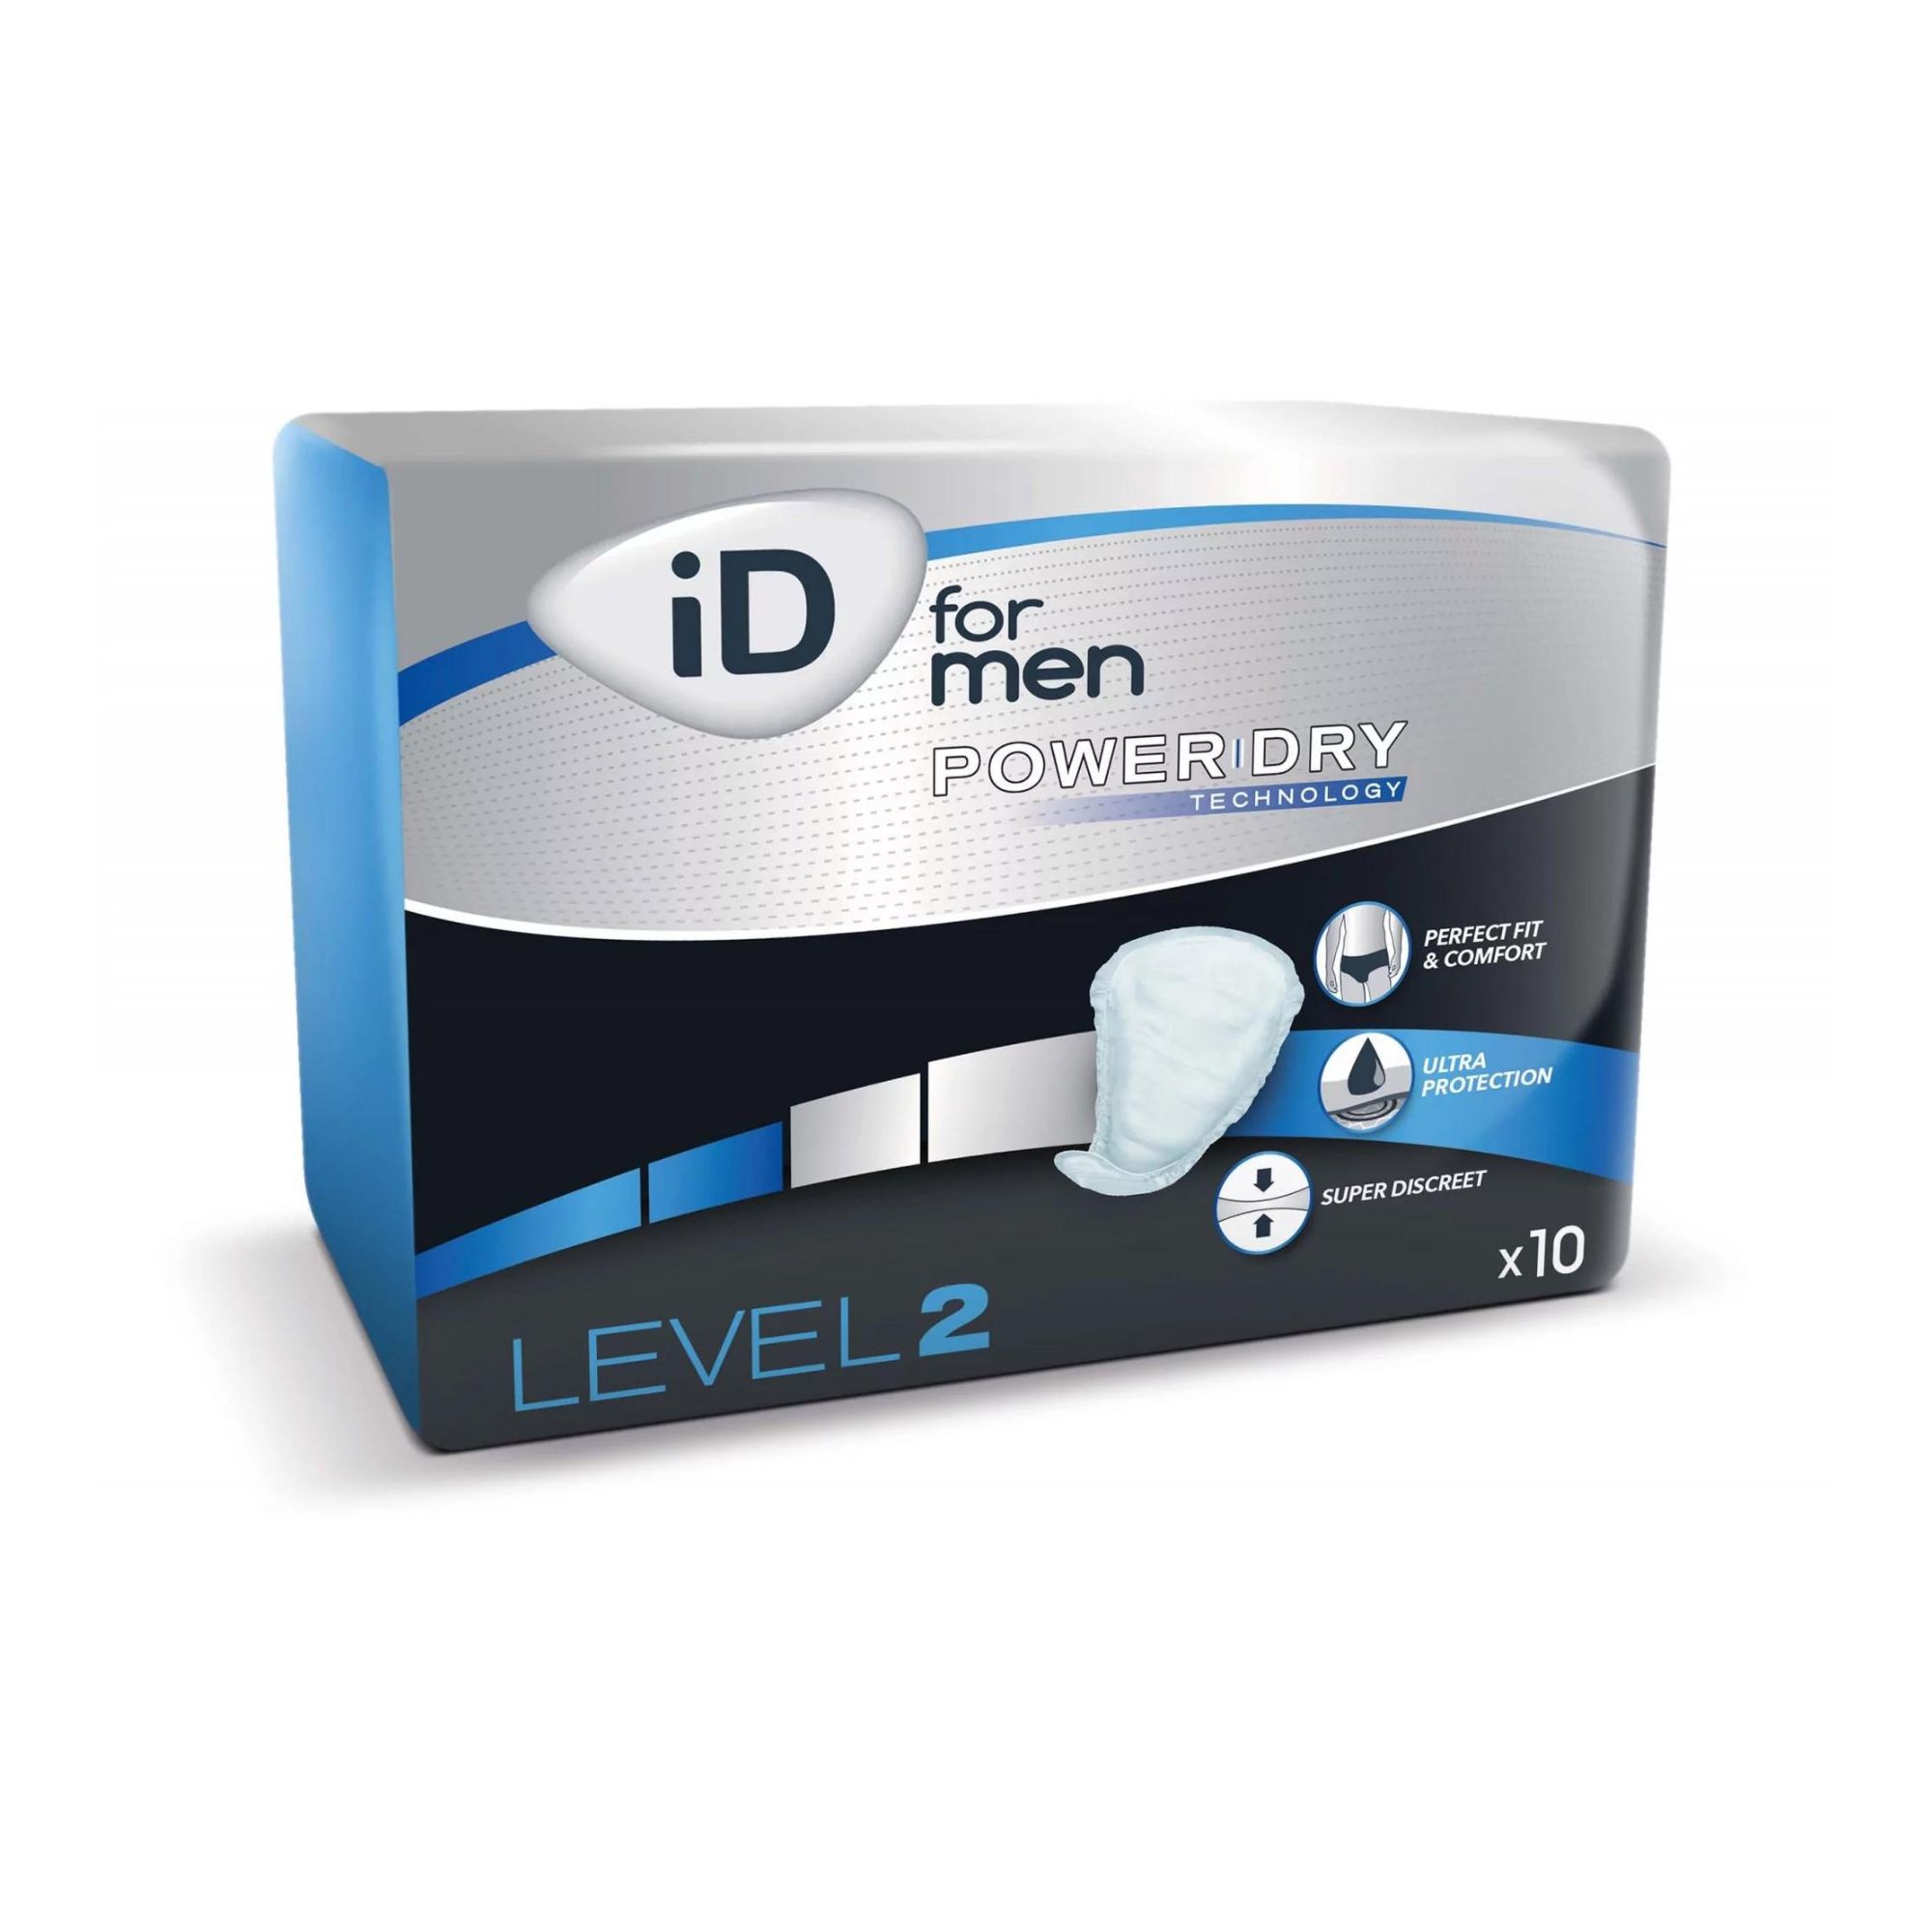 ID For Men - 3 Levels - ID Care